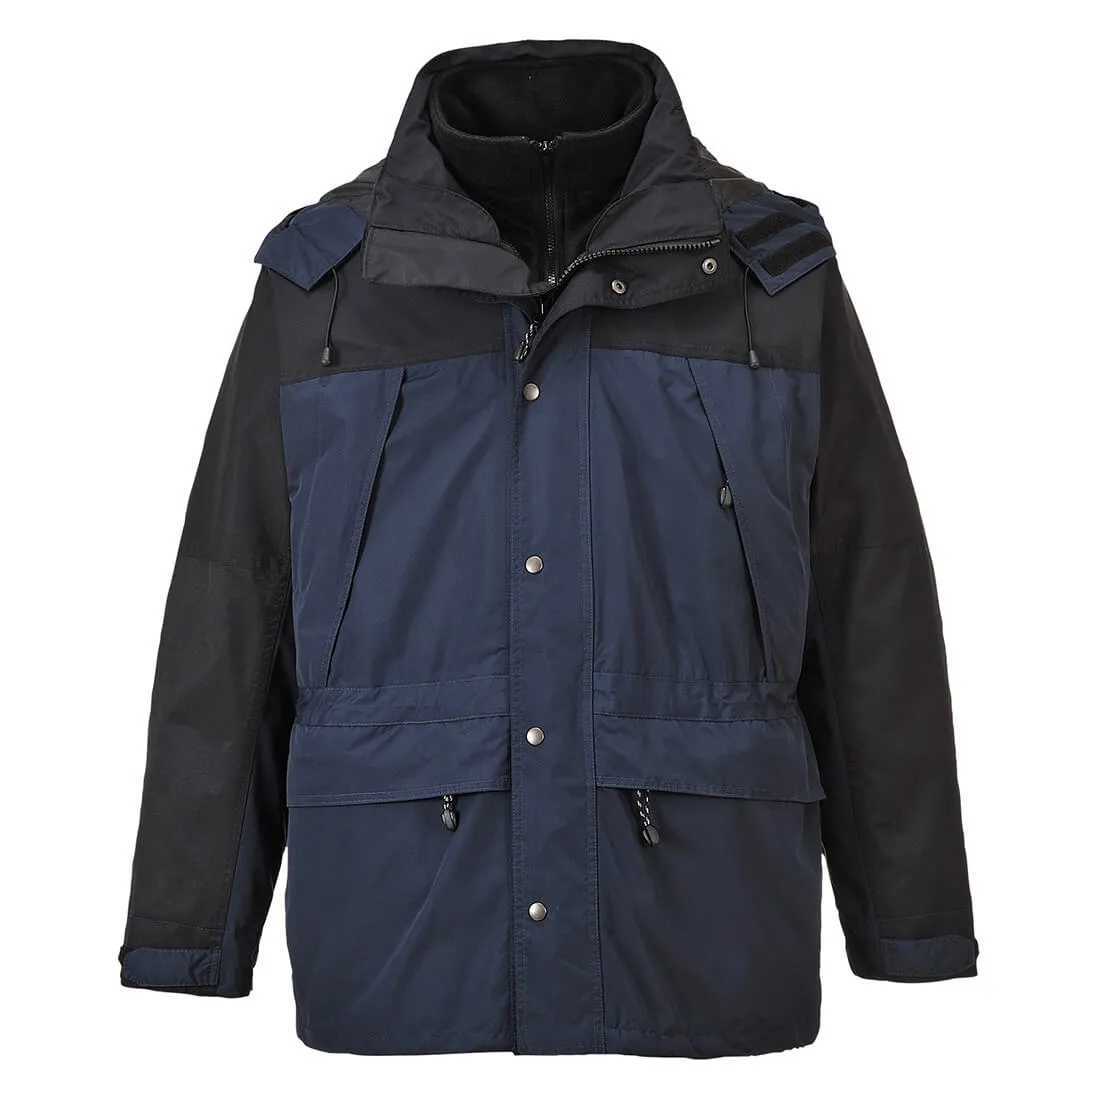 Orkney Mens 3-in-1 Breathable Jacket - Navy, L